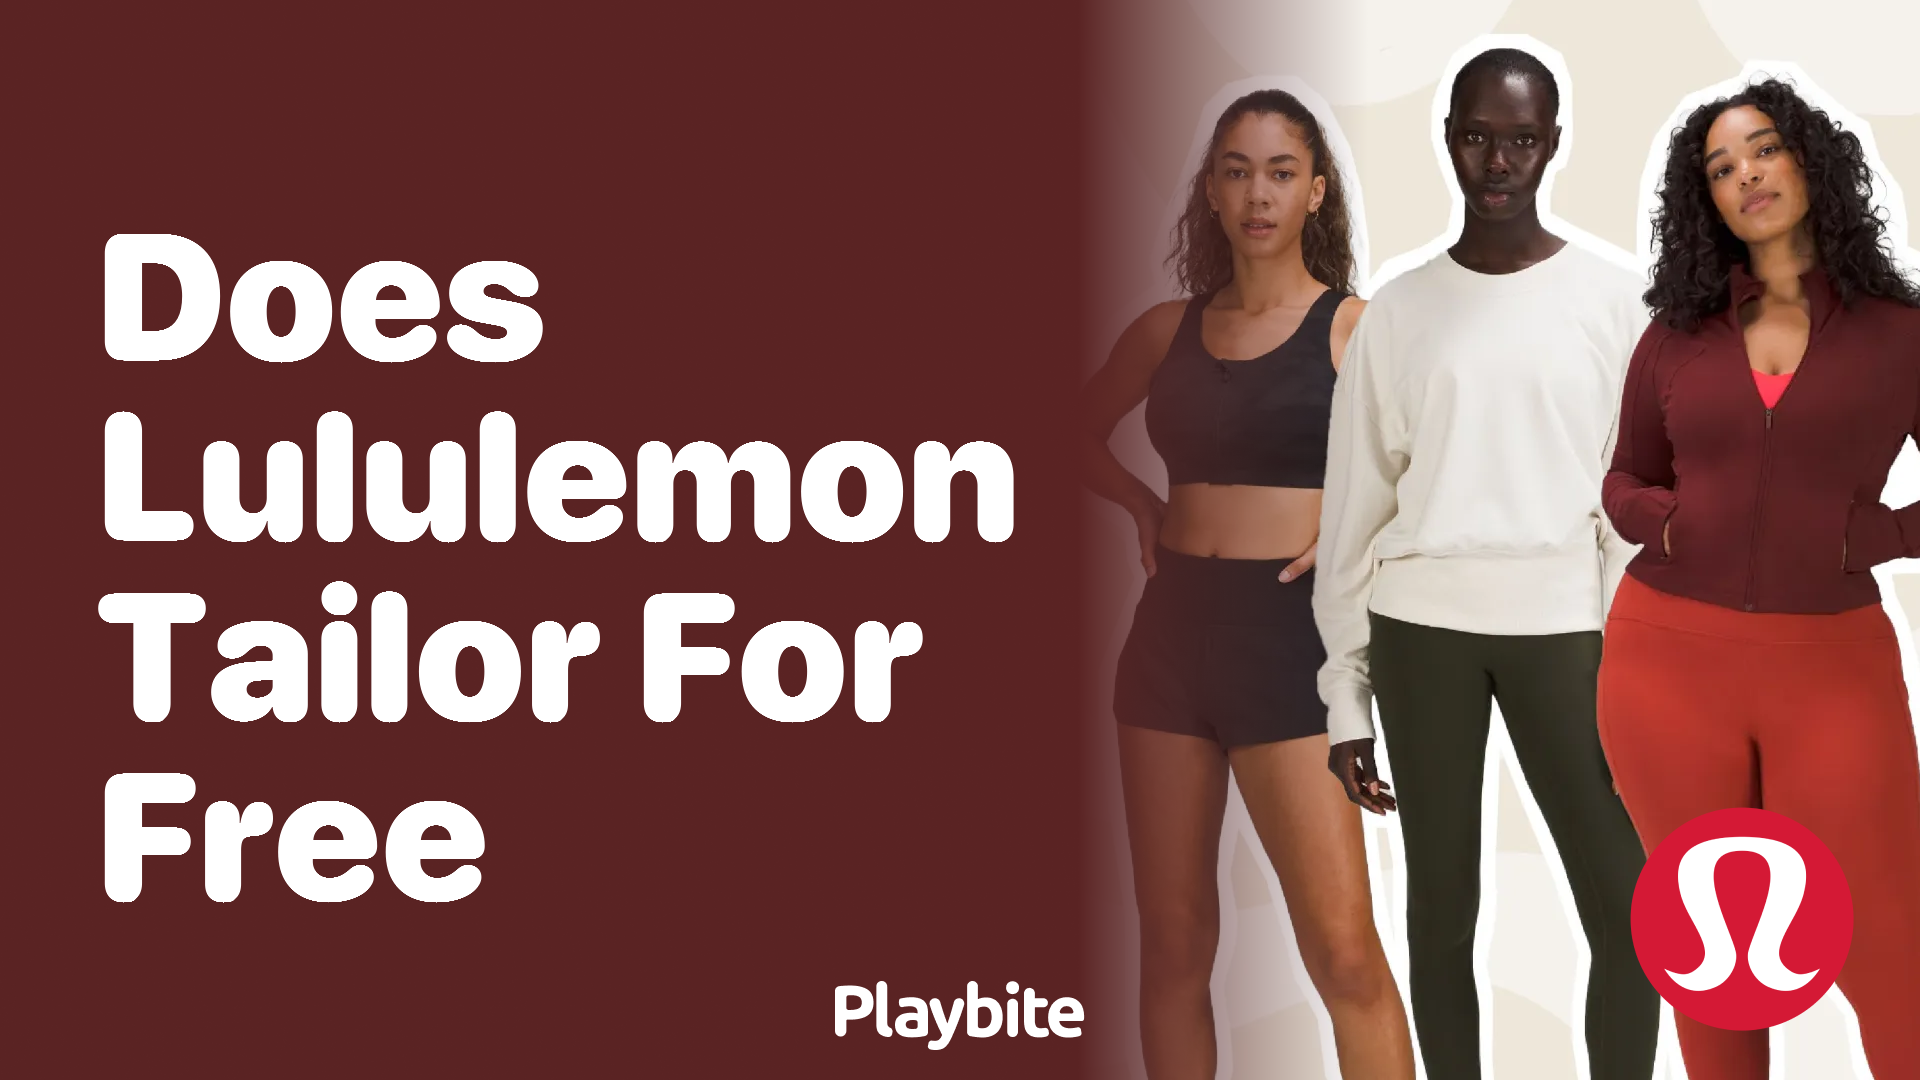 Does Lululemon Offer Alterations? Find Out Here! - Playbite